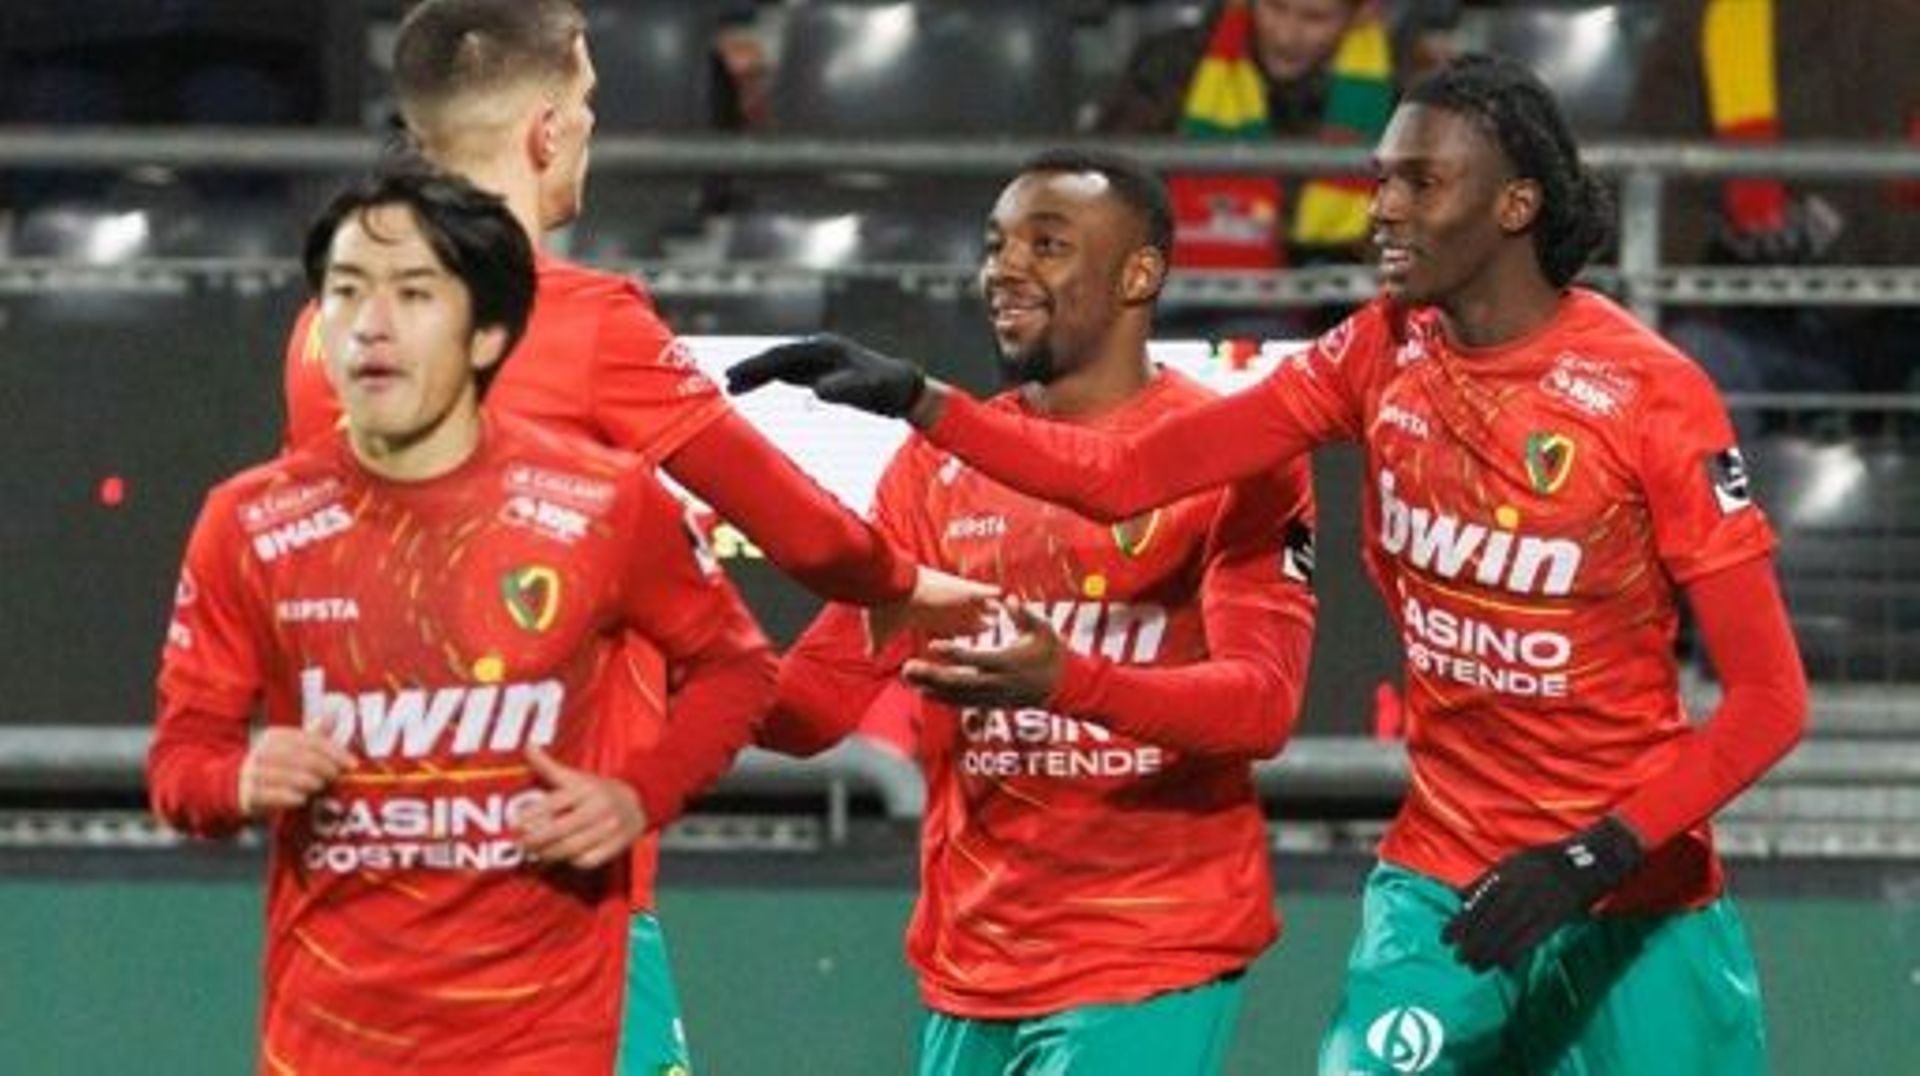 Oostende’s Thierry Ambrose celebrates after scoring during a soccer match between KV Oostende and Cercle Brugge, Saturday 21 January 2023 in Oostende, on day 22 of the 2022-2023 'Jupiler Pro League' first division of the Belgian championship. BELGA PHOTO